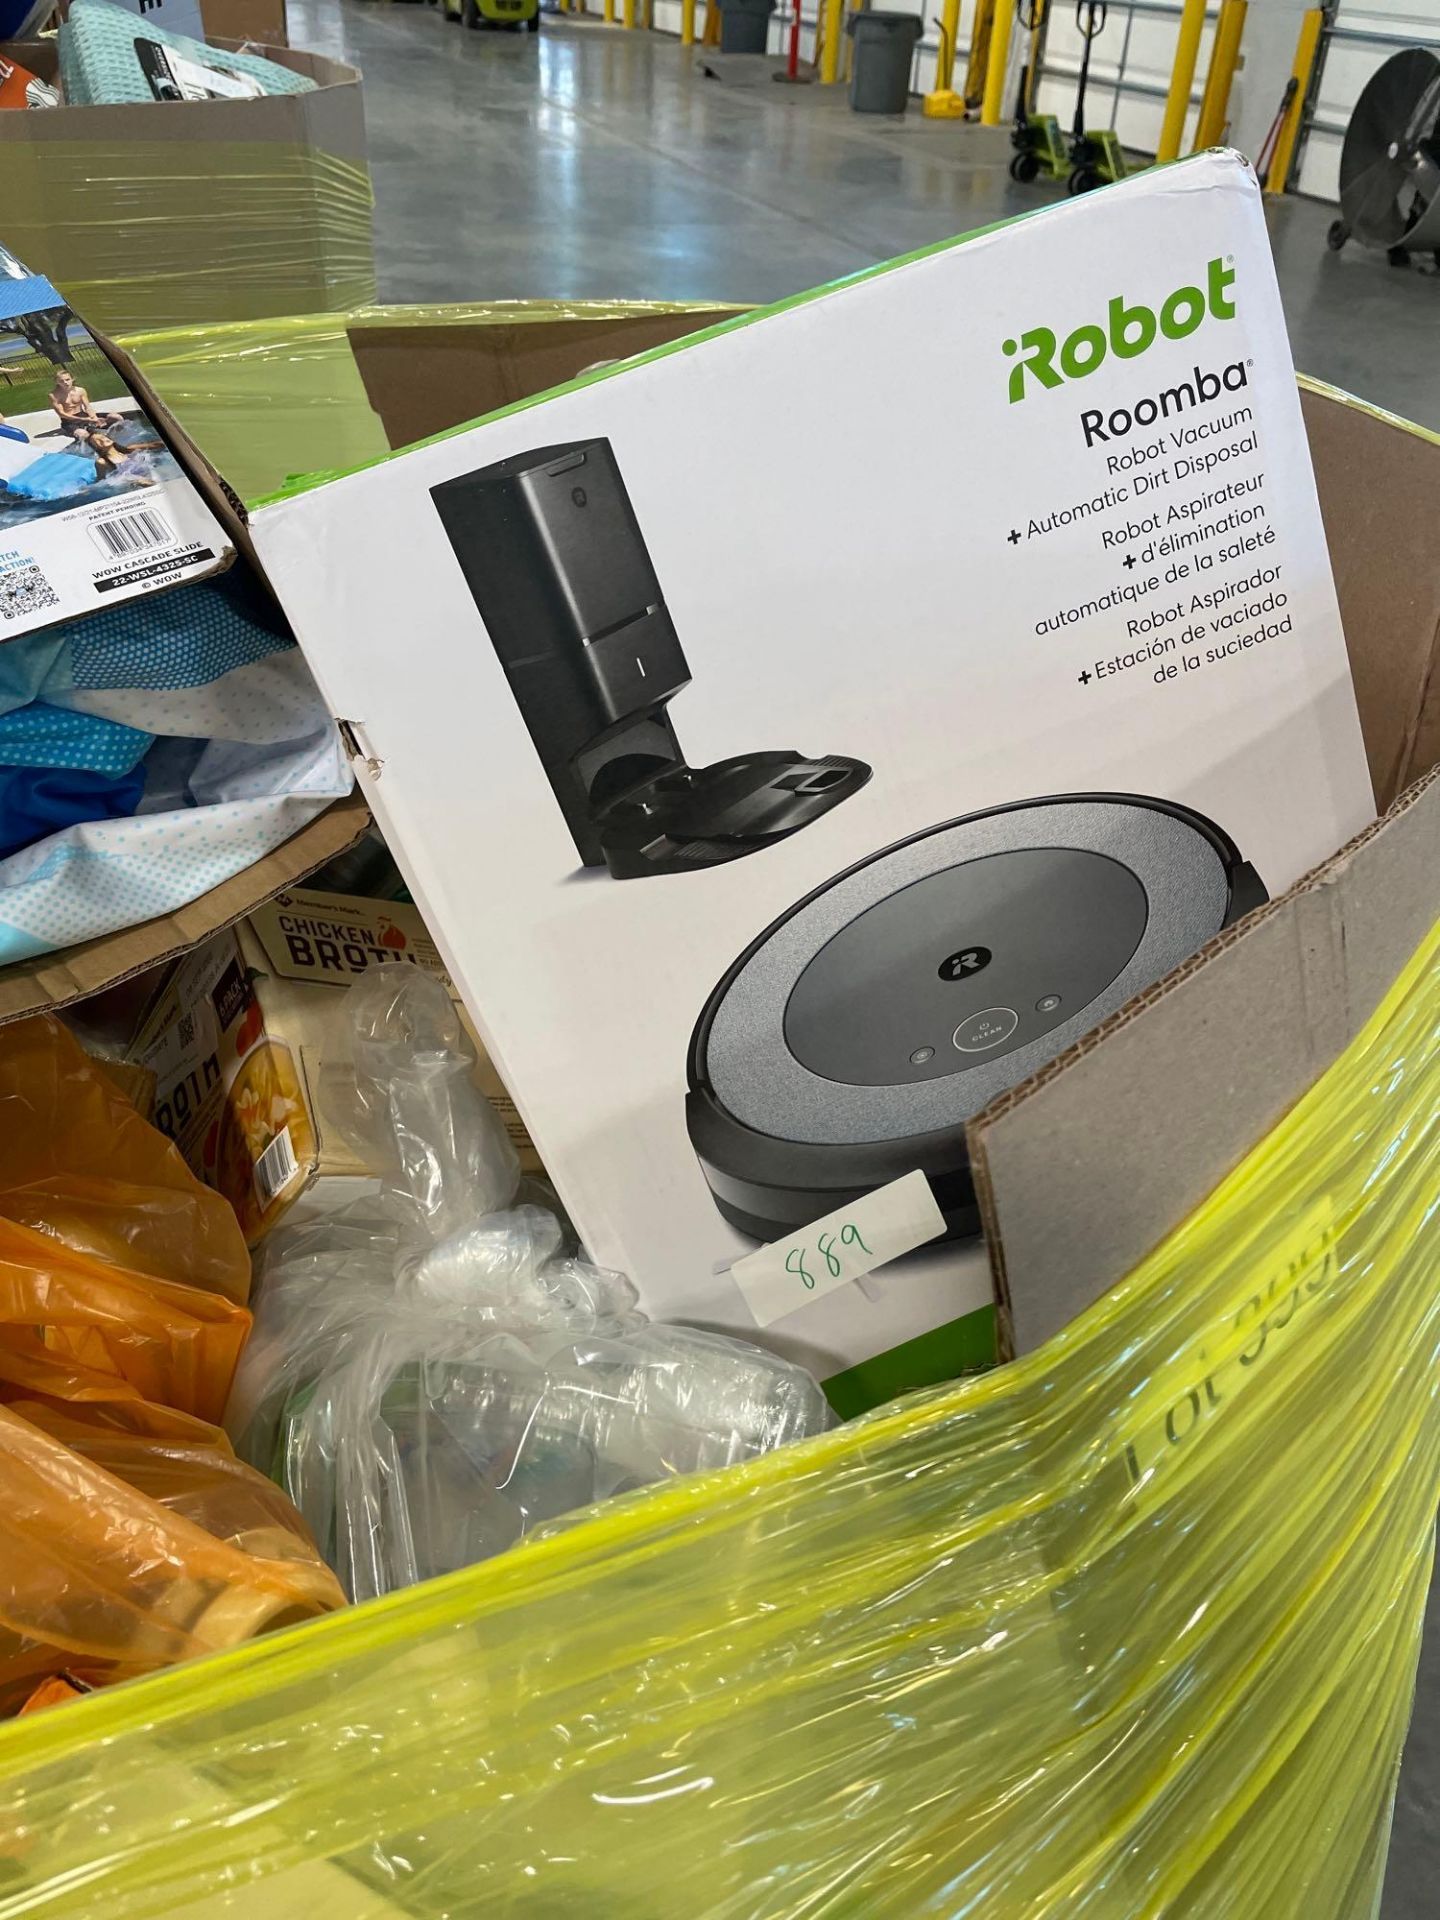 BBB wow Cascade slide iRobot Roomba i3 Plus Keurig cups Pine-Sol chicken broth and much - Image 3 of 12